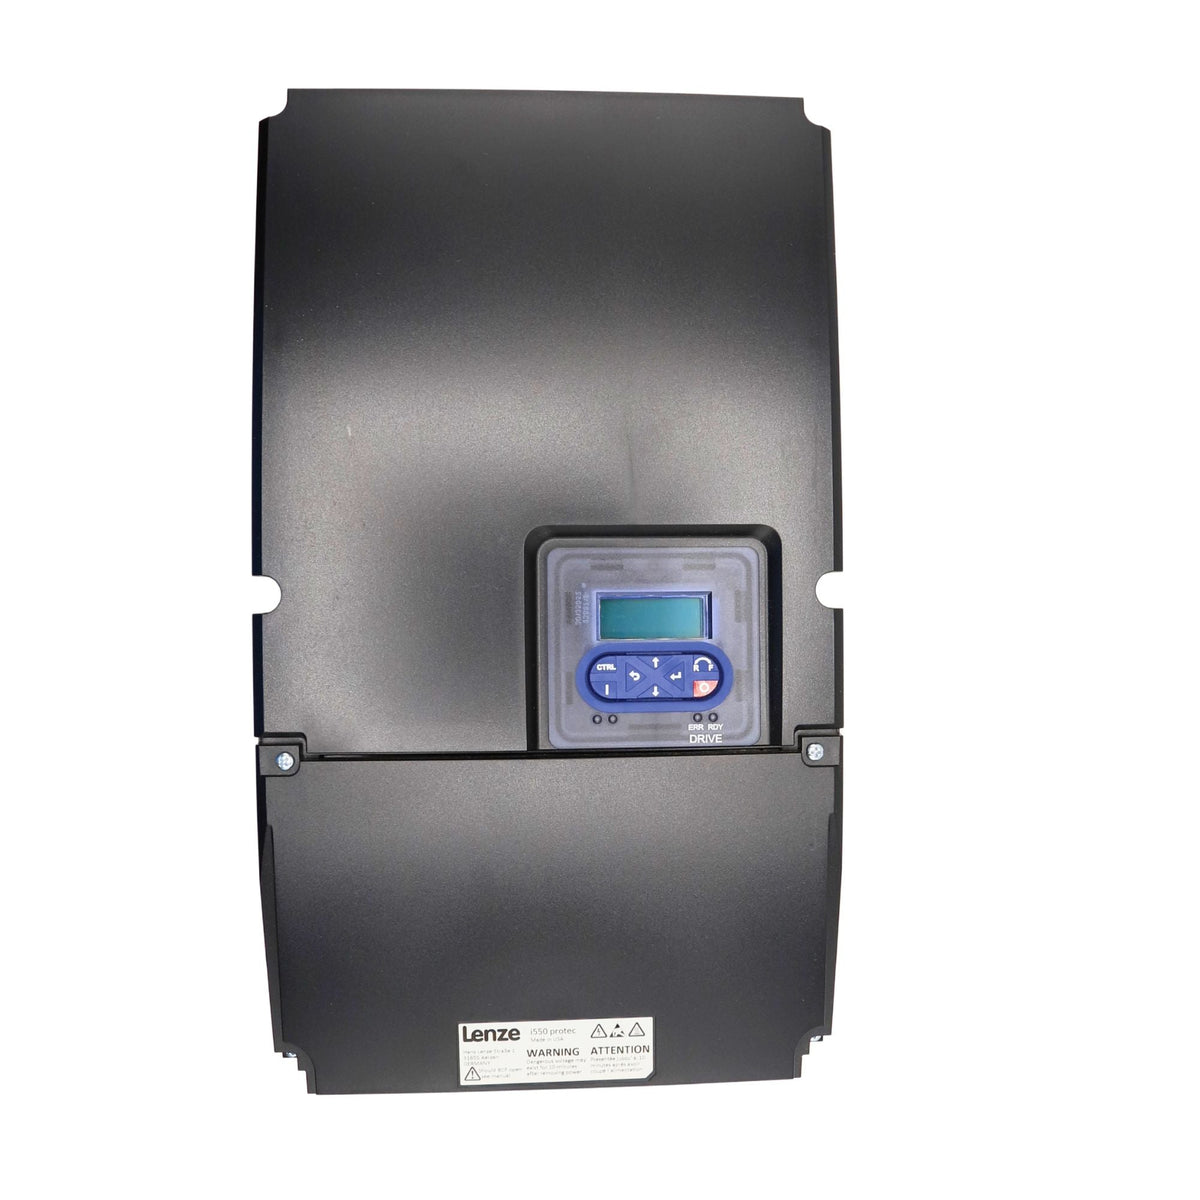 Lenze | I550 Protec 25hp Wall Mount, Nema 4x rated, Keypad, Incremental encoder (HTL) via two digital inputs, 5digital inputs, 2 analog inputs, 1 digital output 1 analog Output, 1 relay | I55AP318F00711K00S - front view